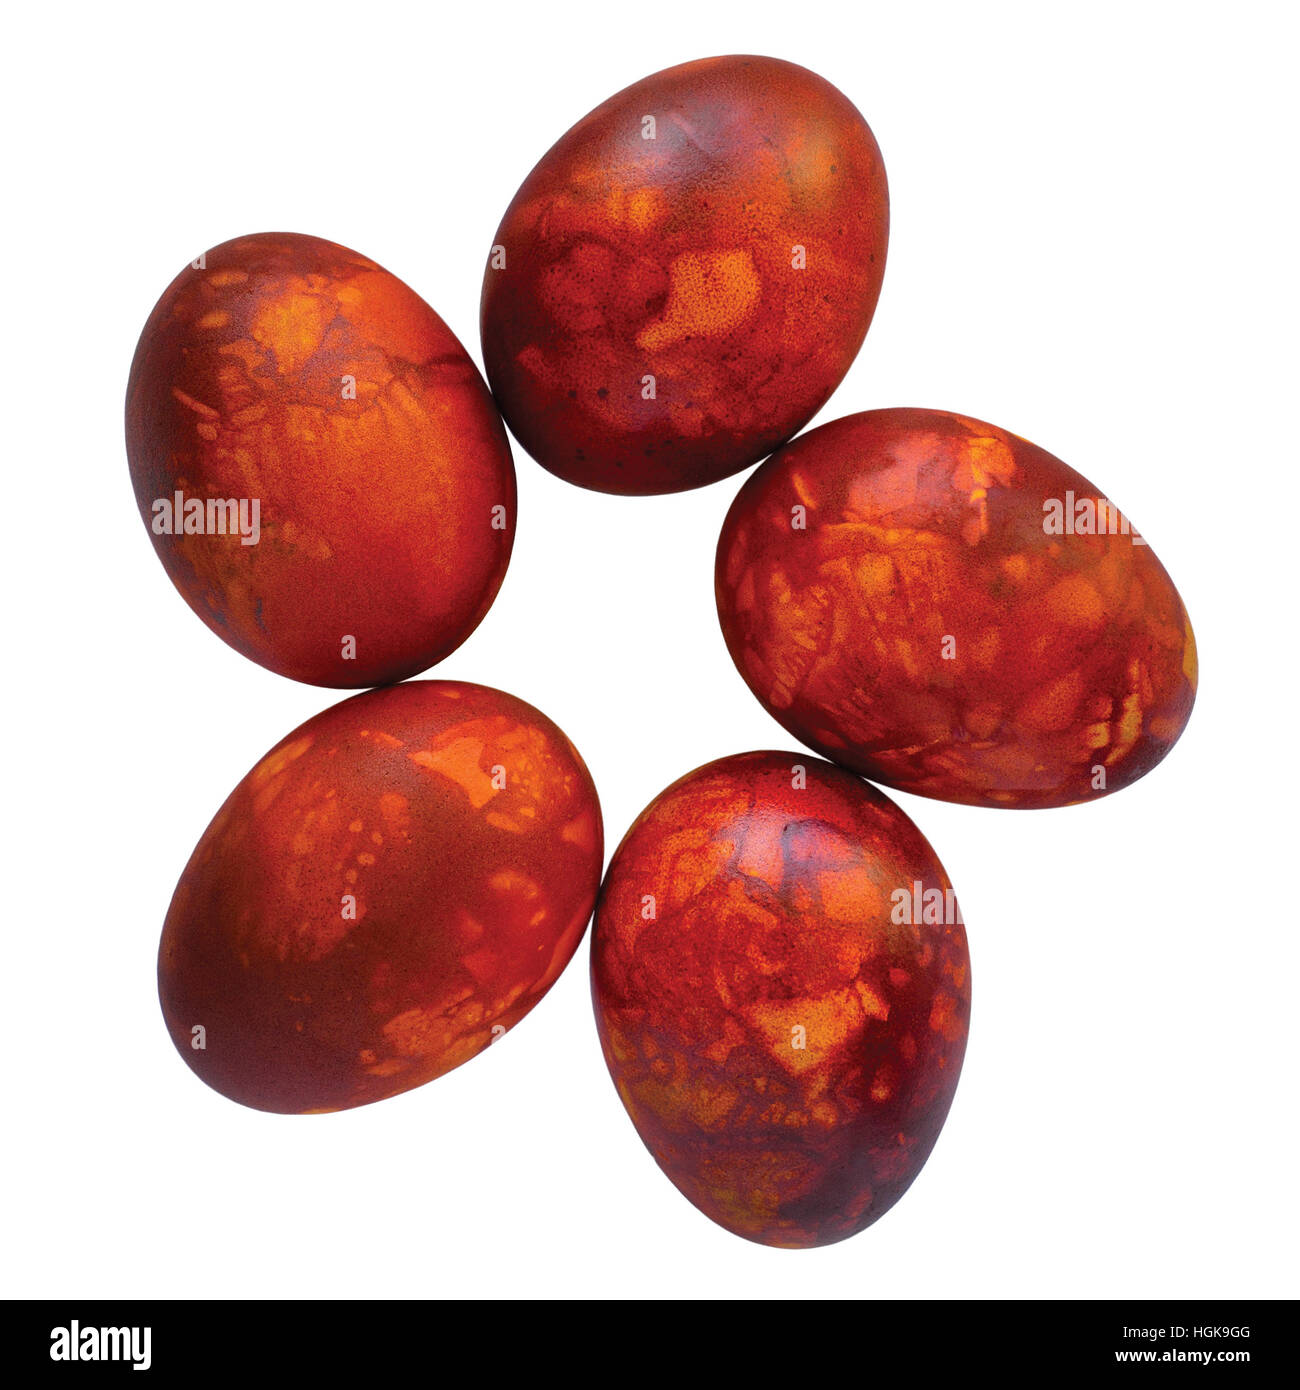 Five traditional red Easter eggs, onions peel colored, painted in onion skins, large detailed isolated rustic vintage macro closeup studio shot Stock Photo